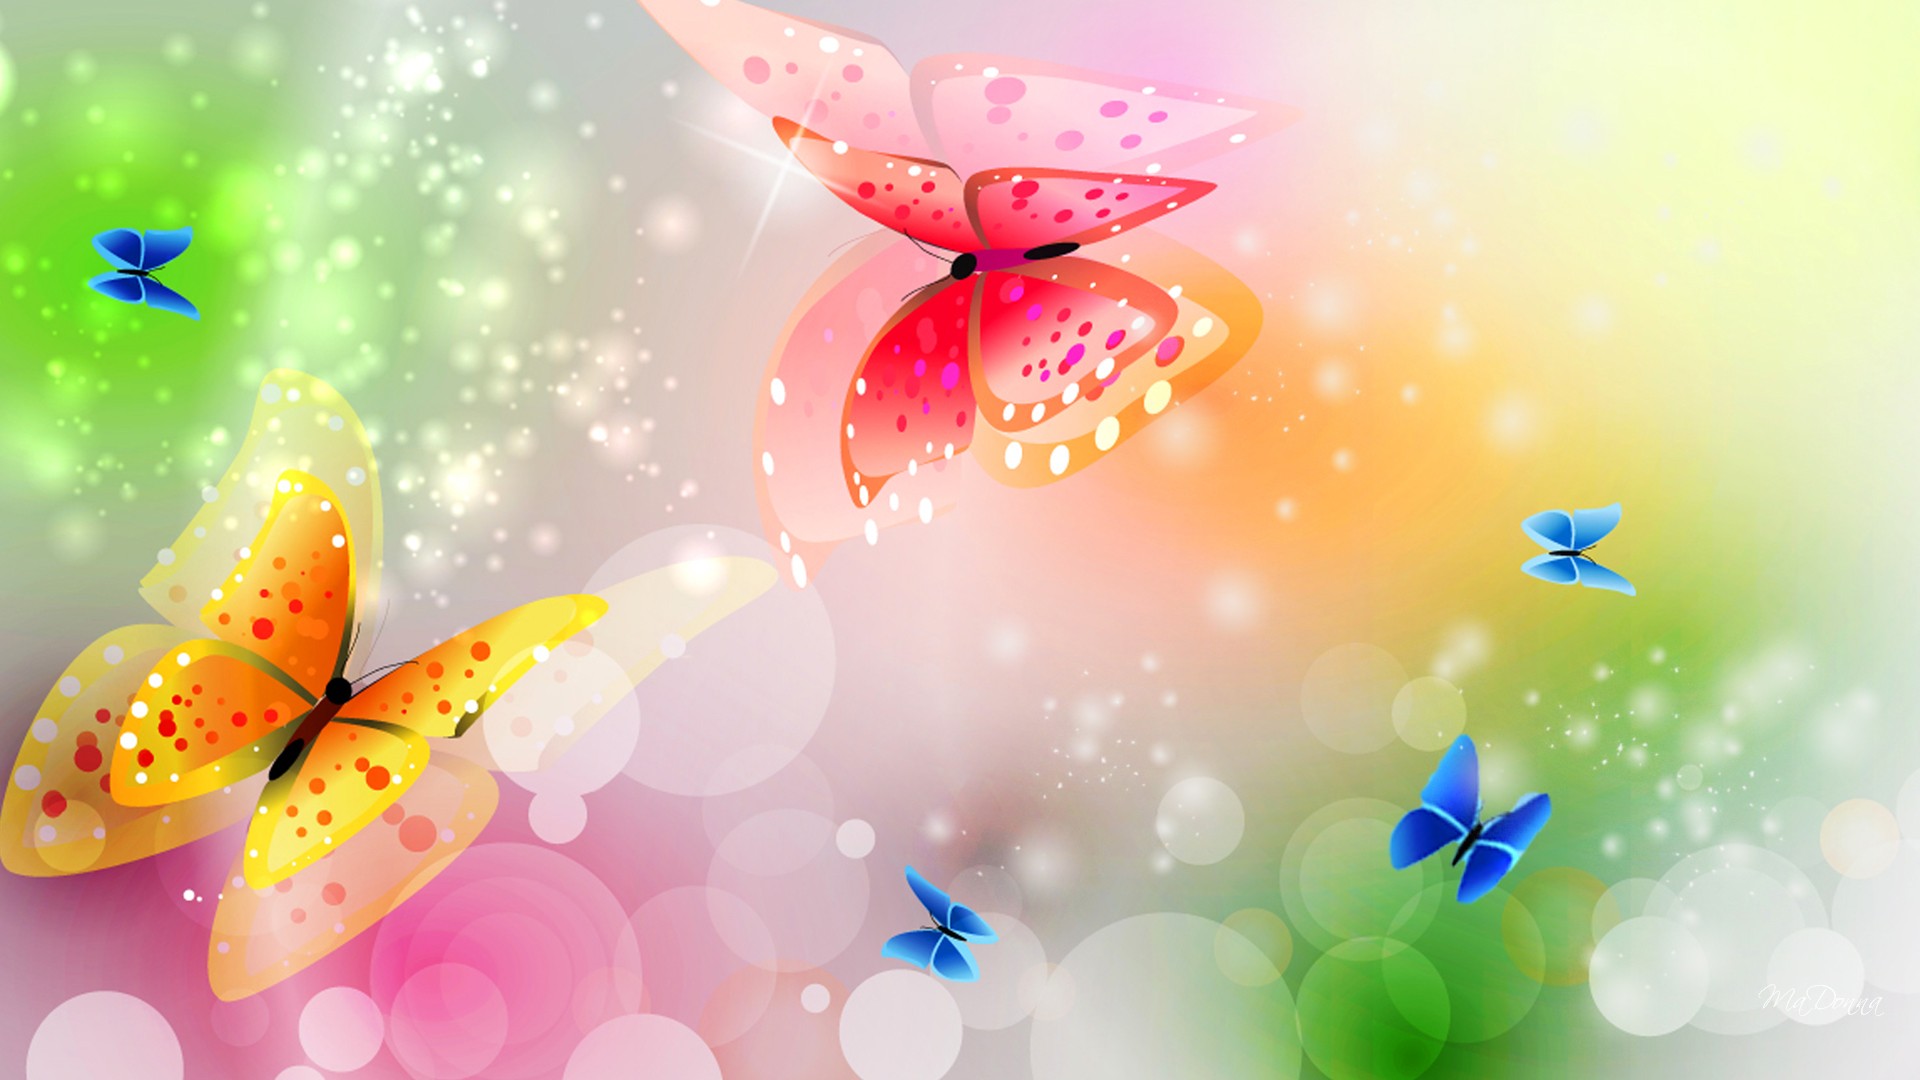 Abstract Shining Butterfly Wallpaper